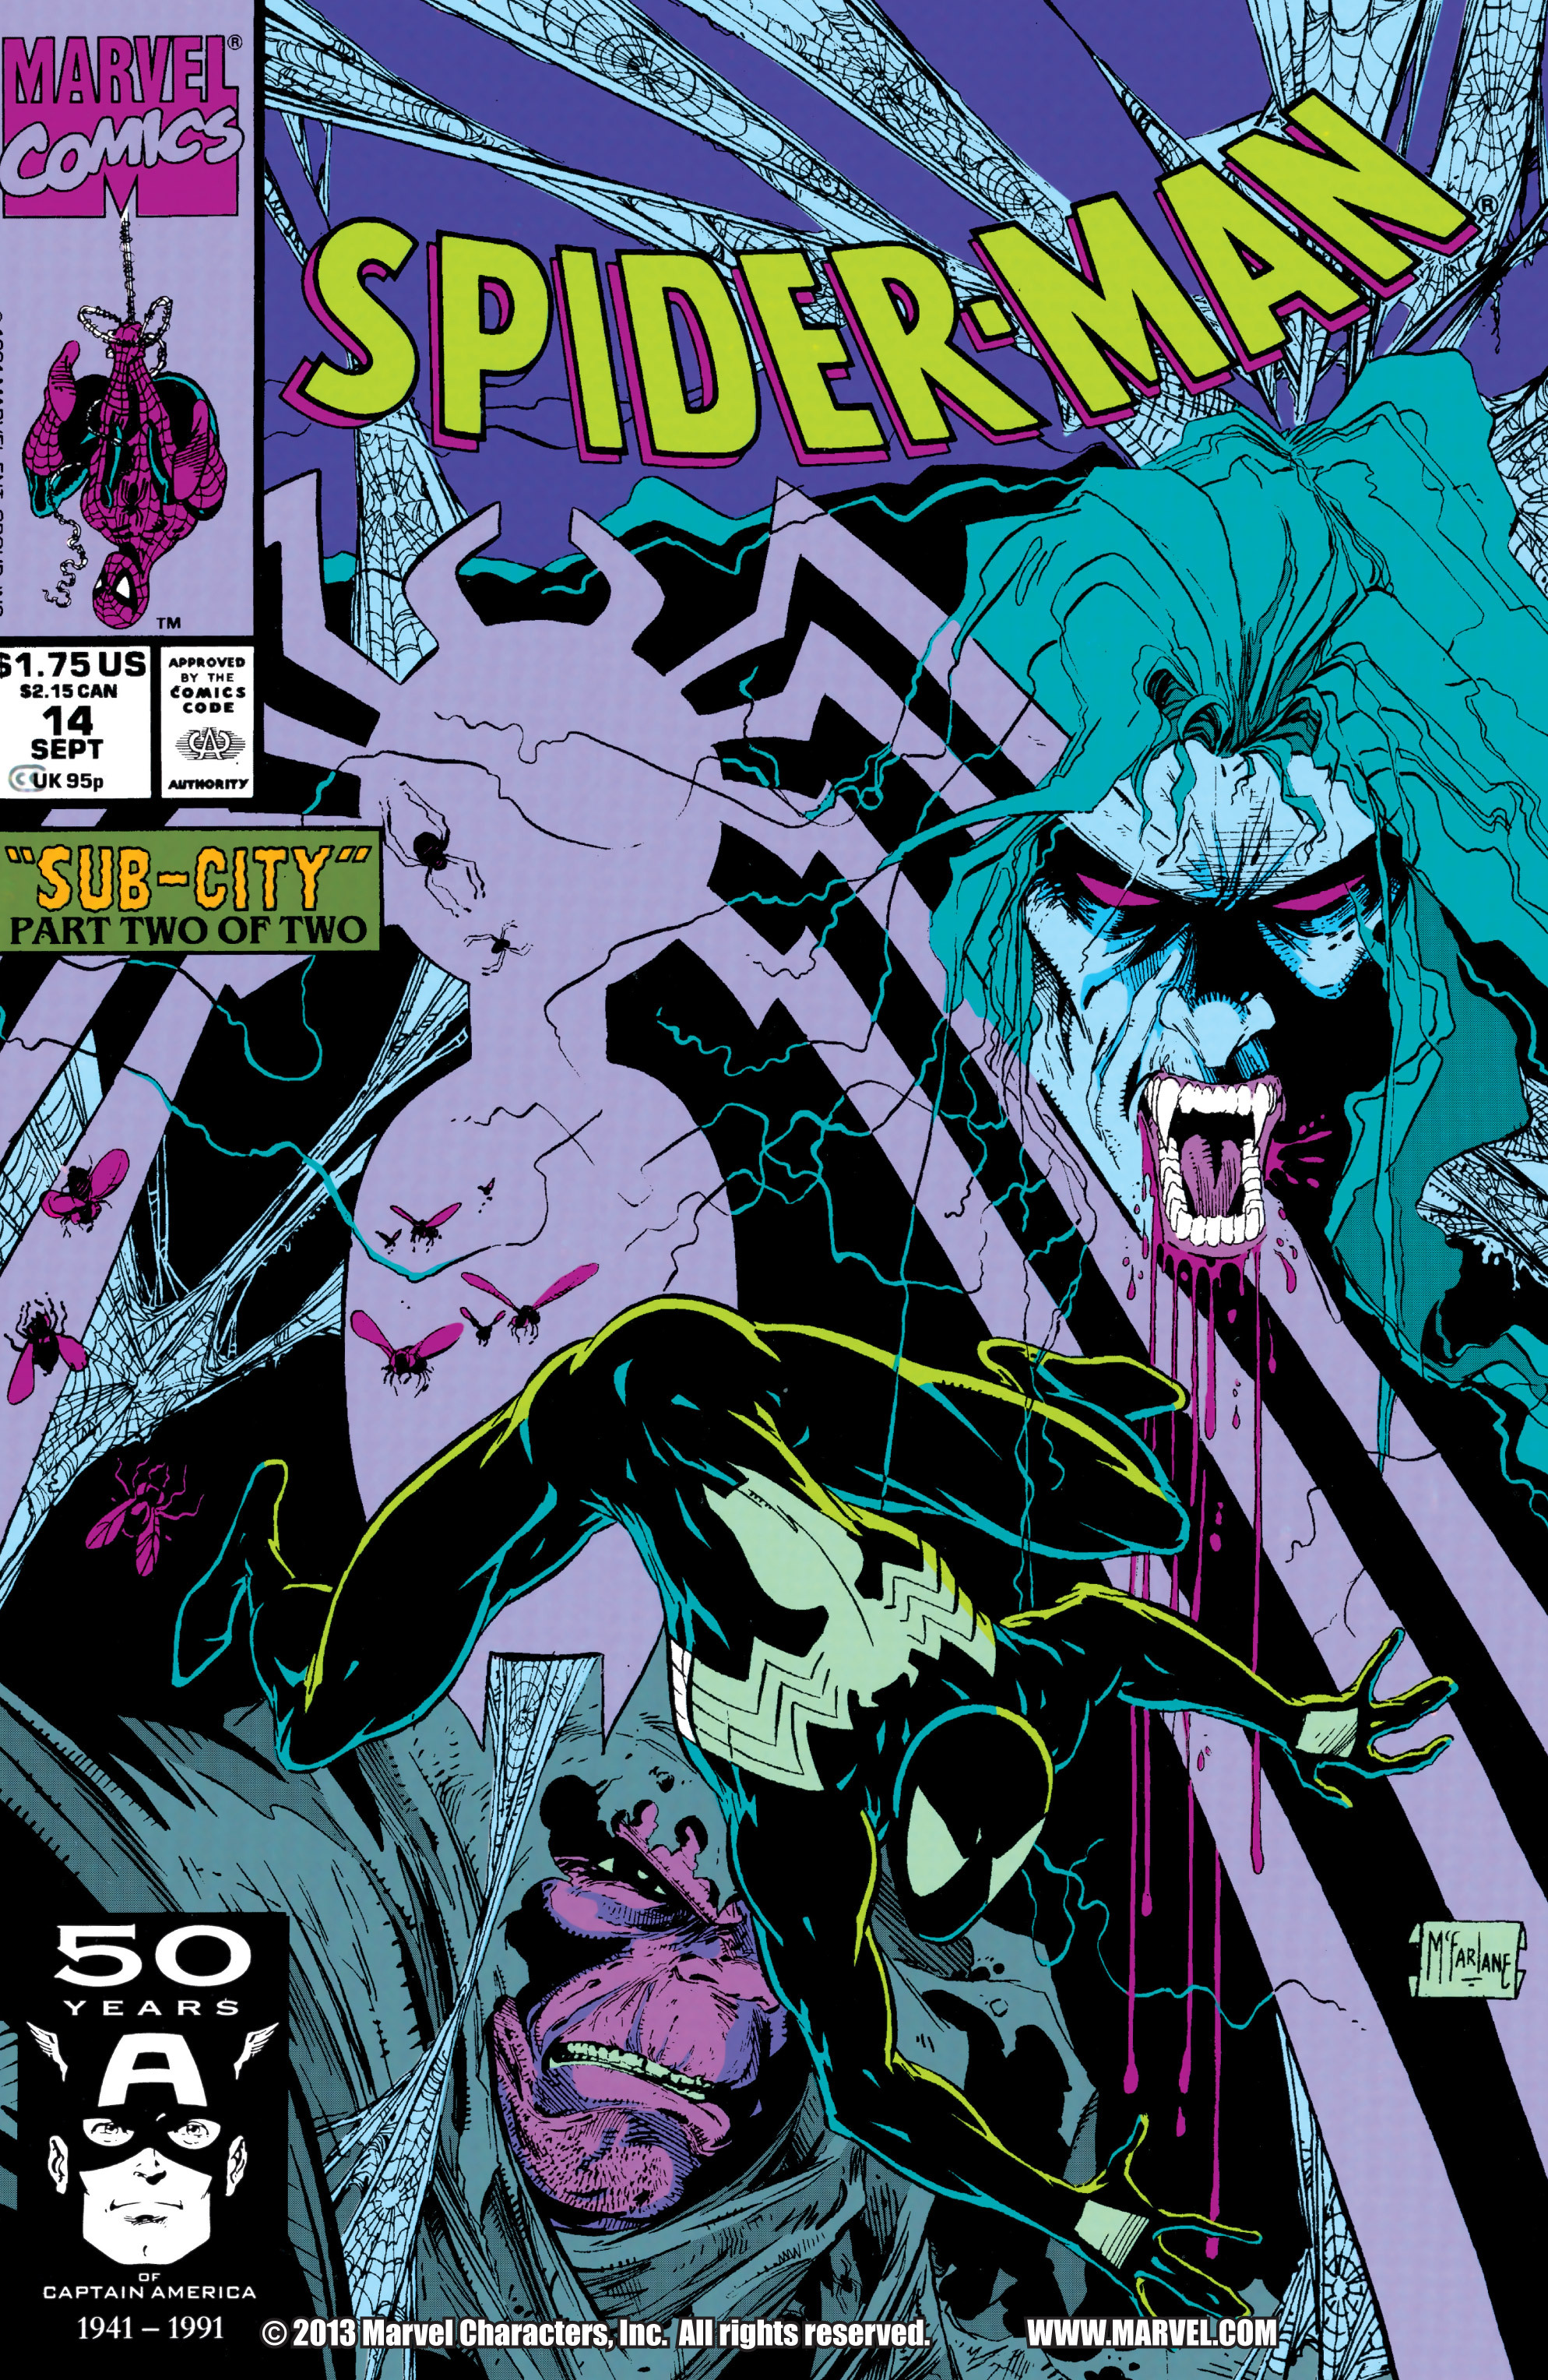 Spider-Man (1990) 14_-_Sub_City_Part_2_of_2 Page 0